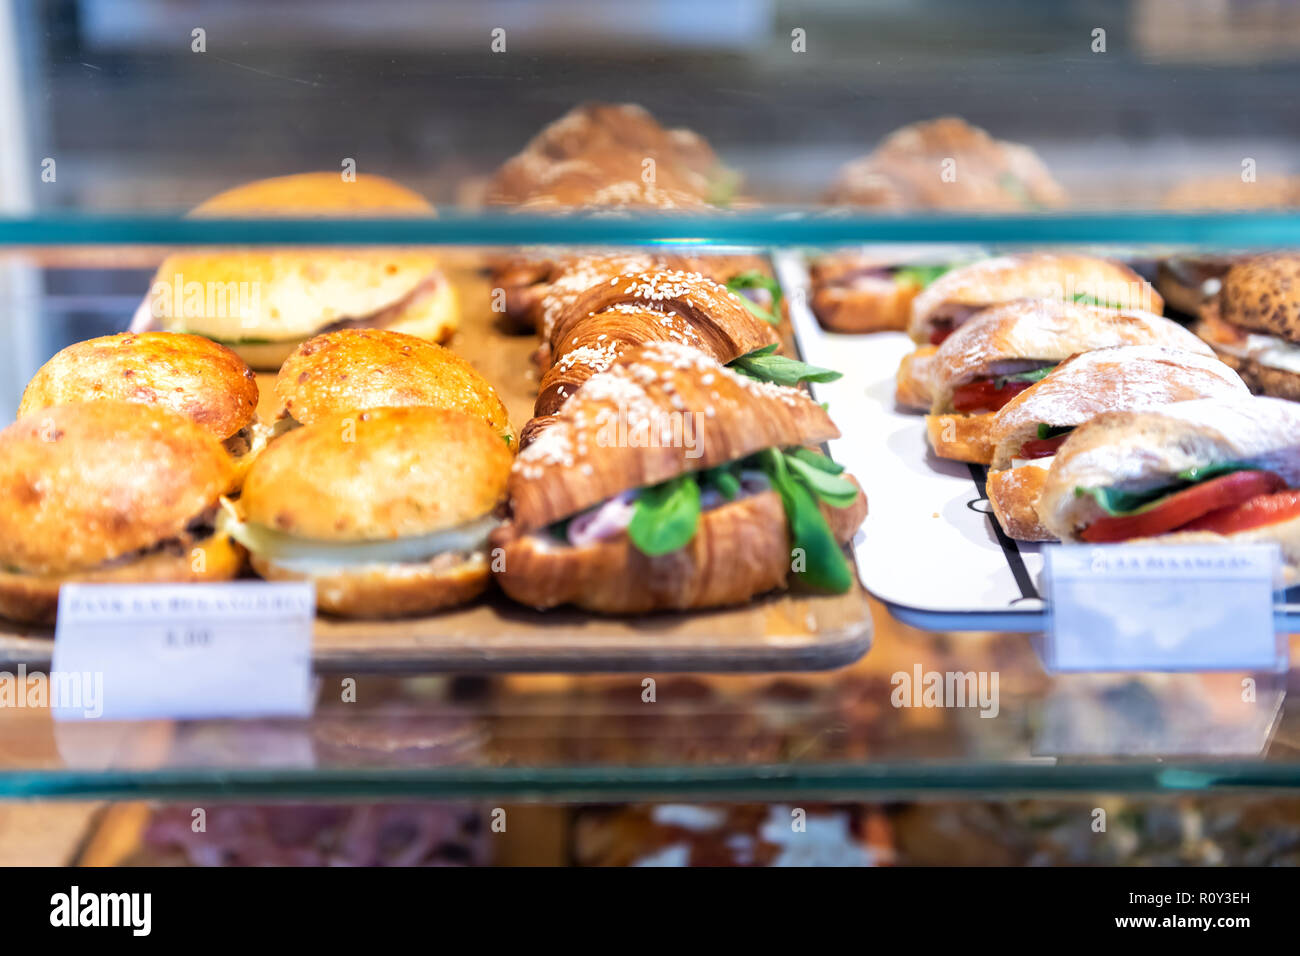 Display of store, shop selling Italian panini sandwiches with deli bologna meat, ricotta cheese, tomatoes, green spinach, buns, croissants on tray, pl Stock Photo